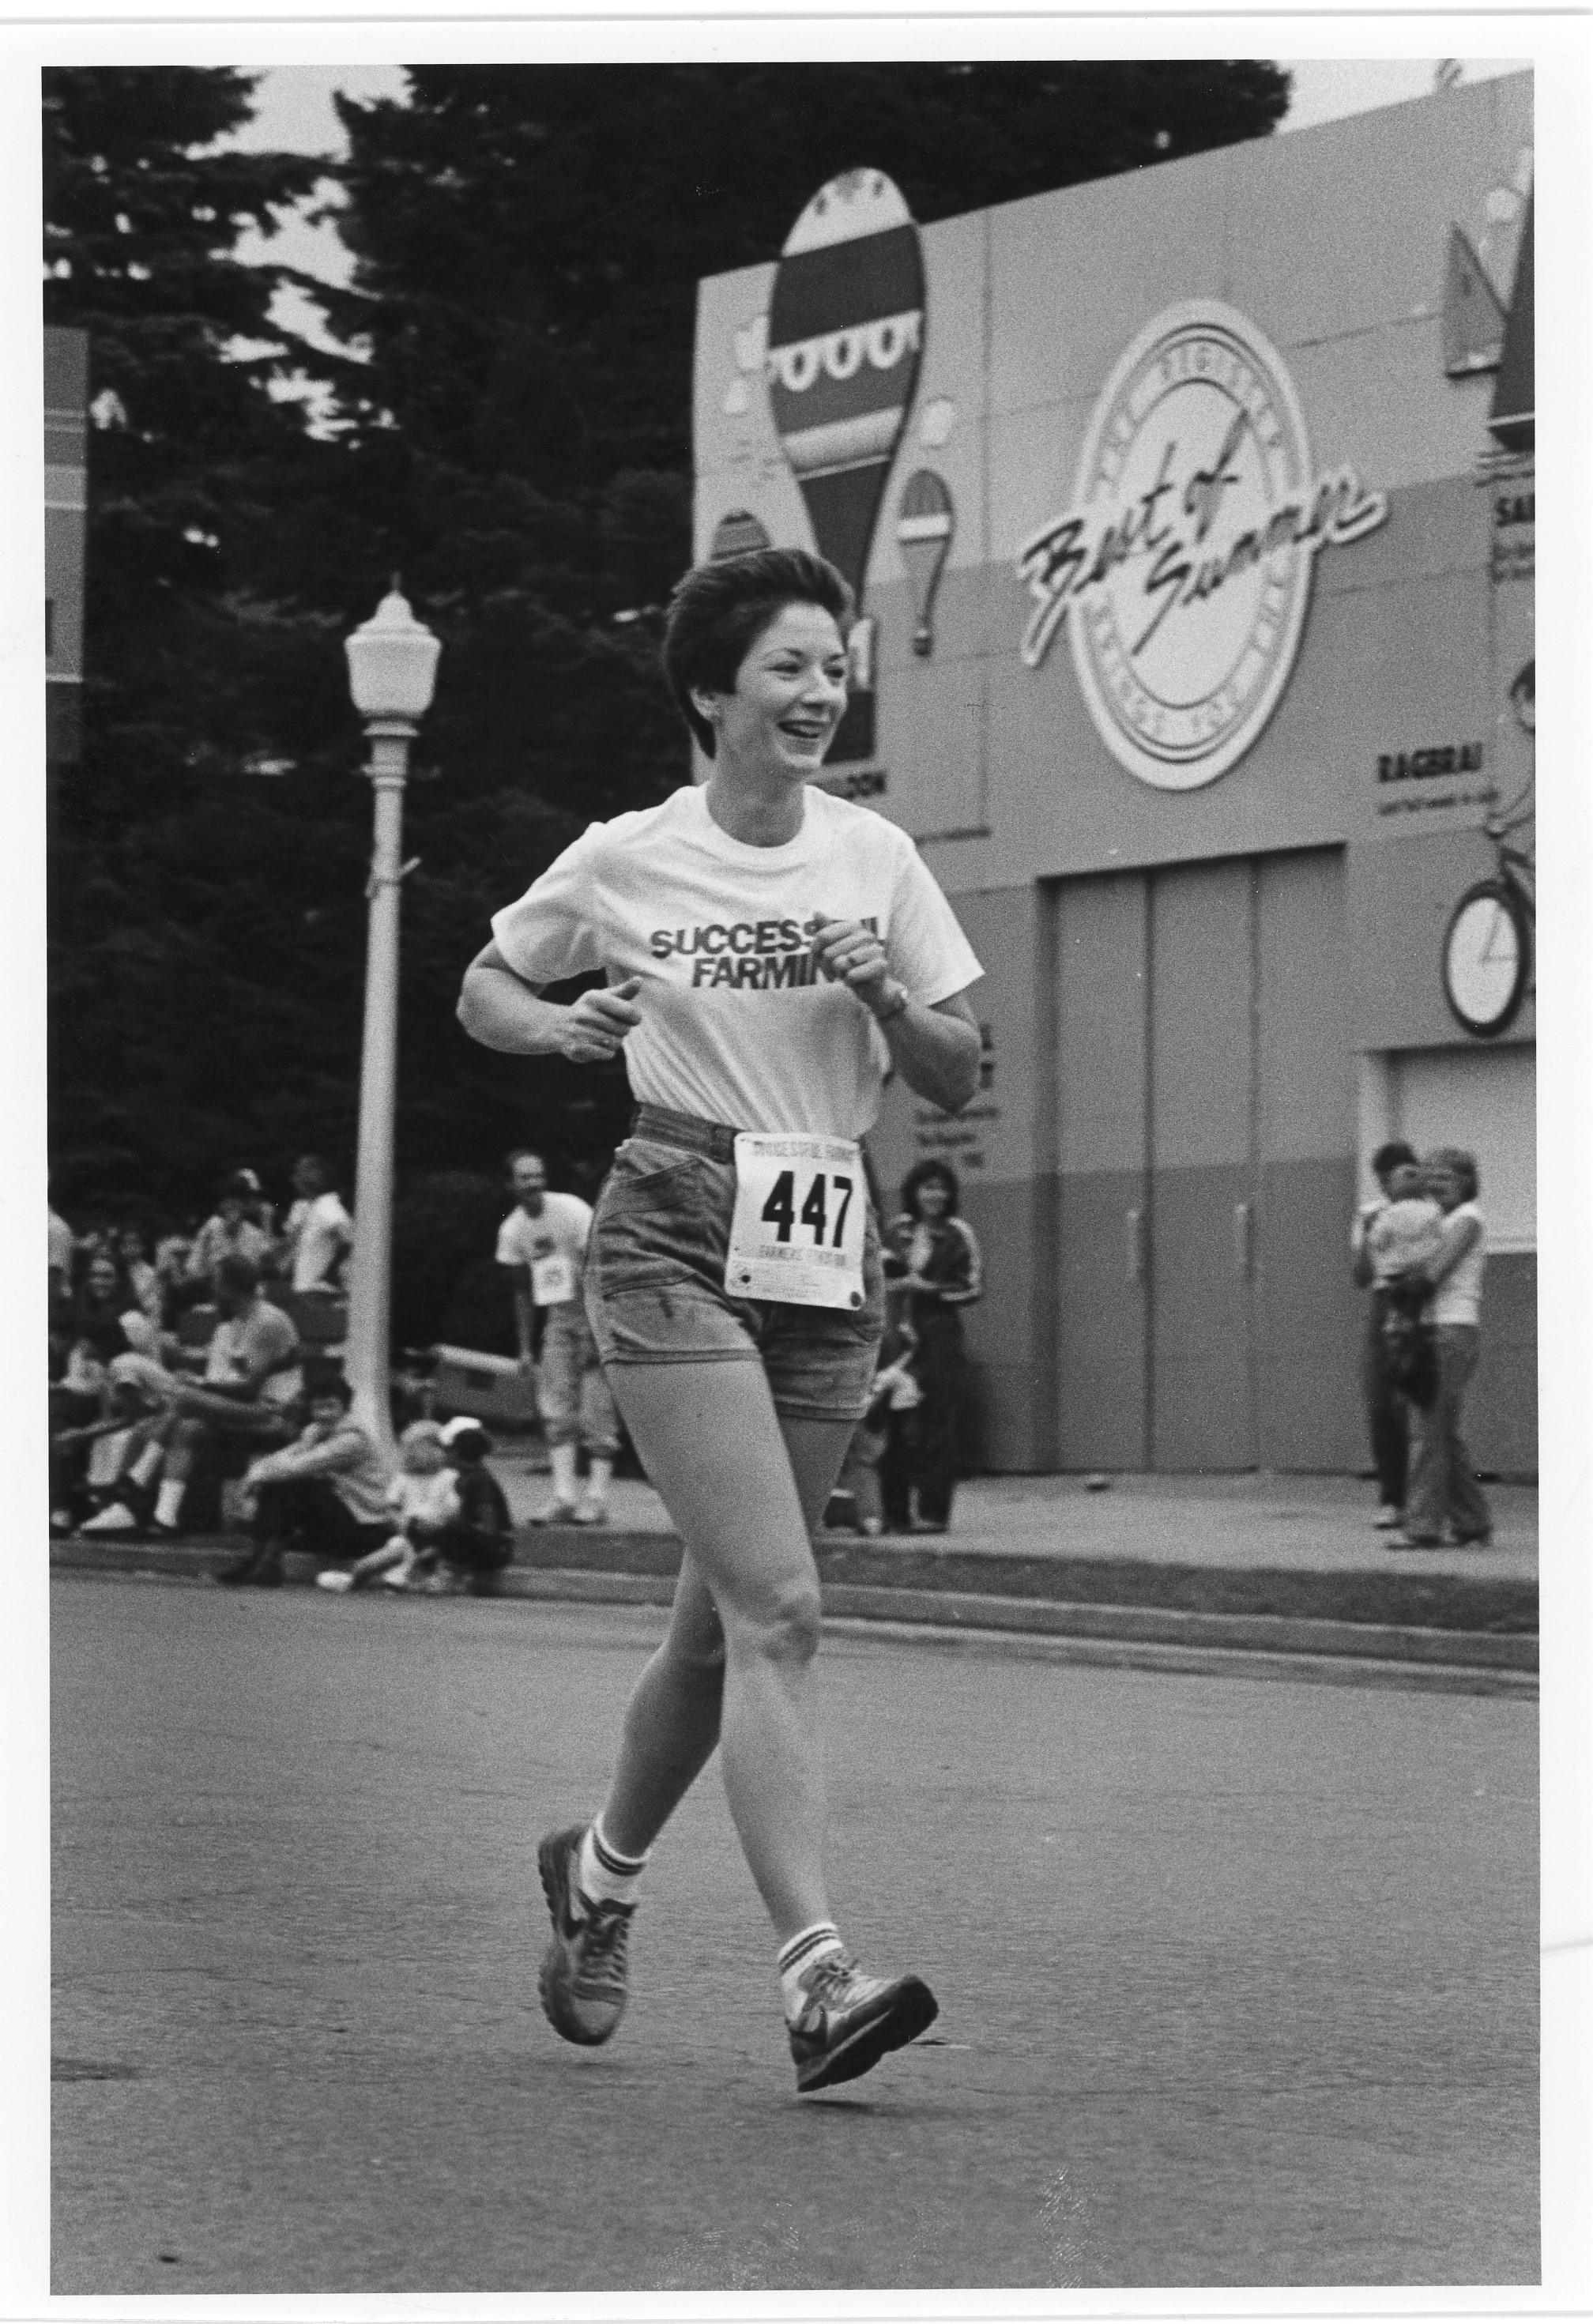 Black and white image of a woman running a marathon